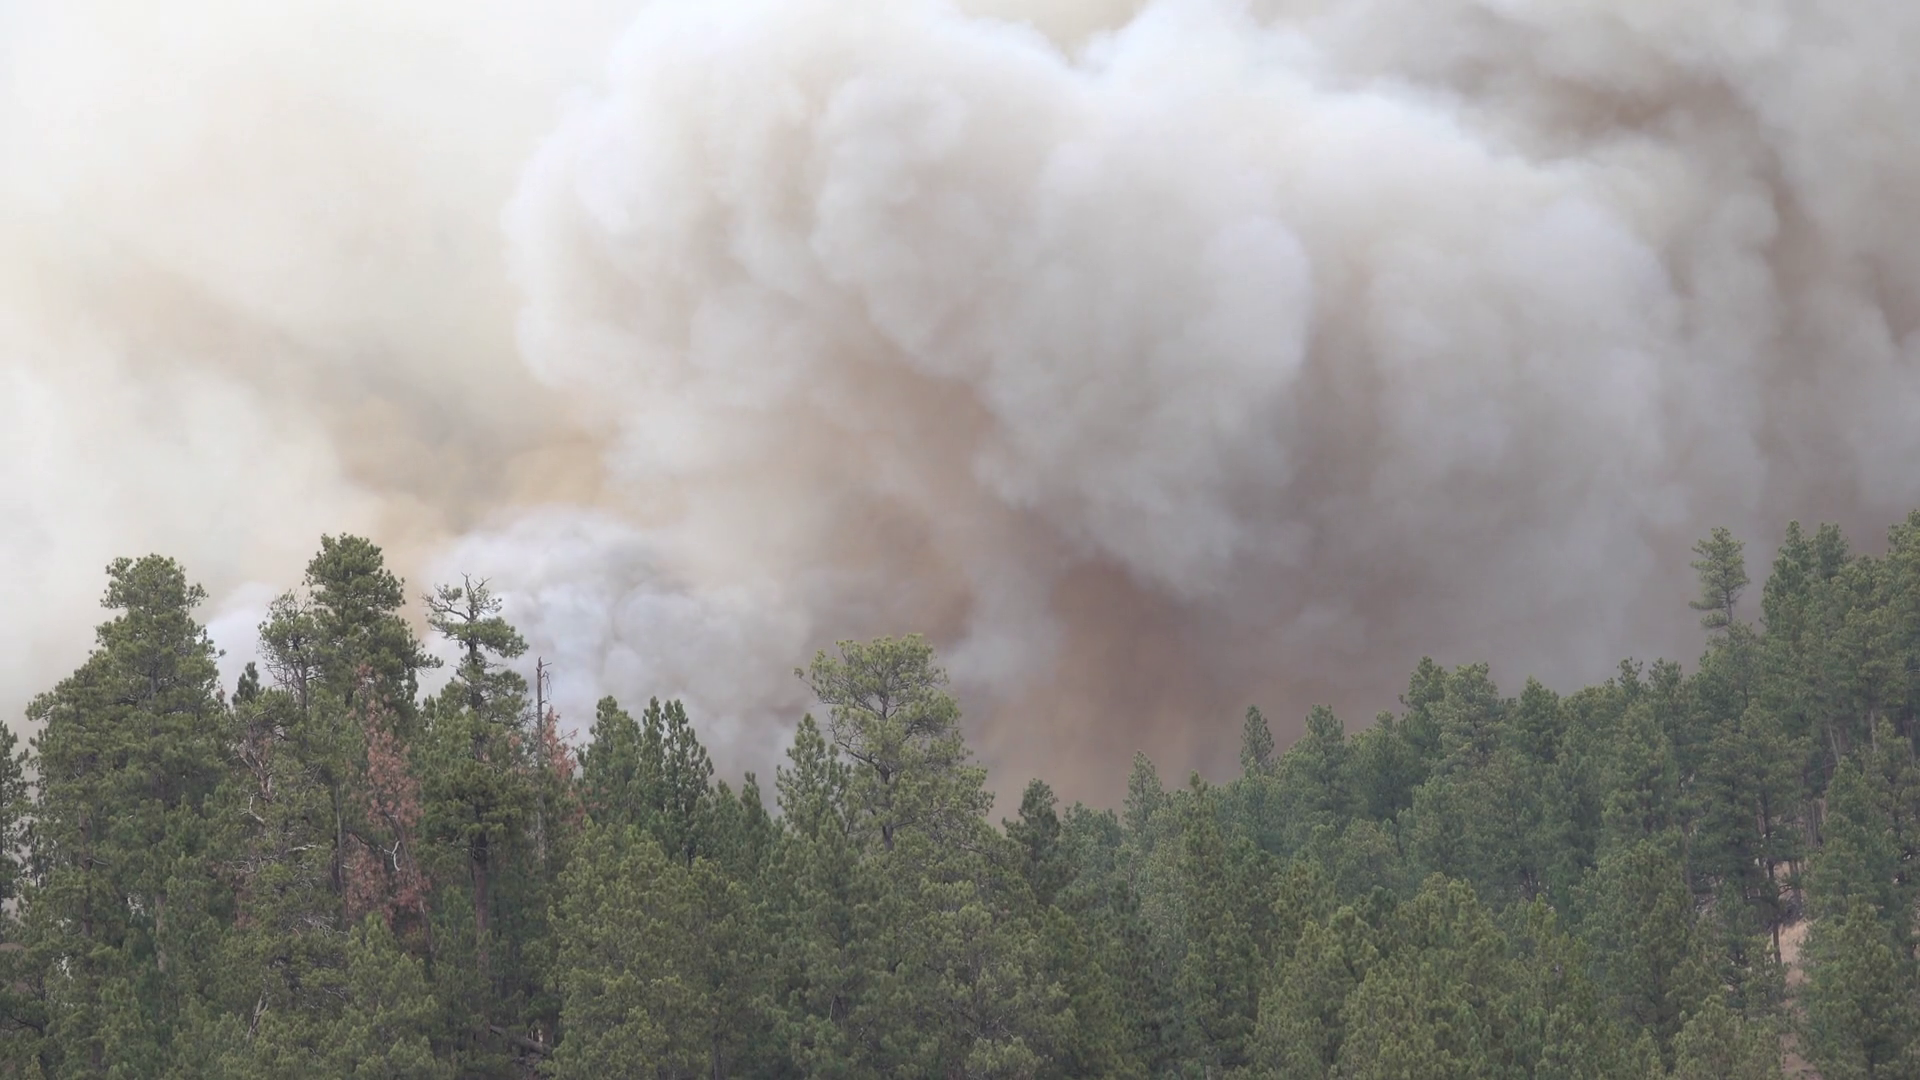 CLOSE UP: Thick black smoke trail rising from pine trees burning in ...